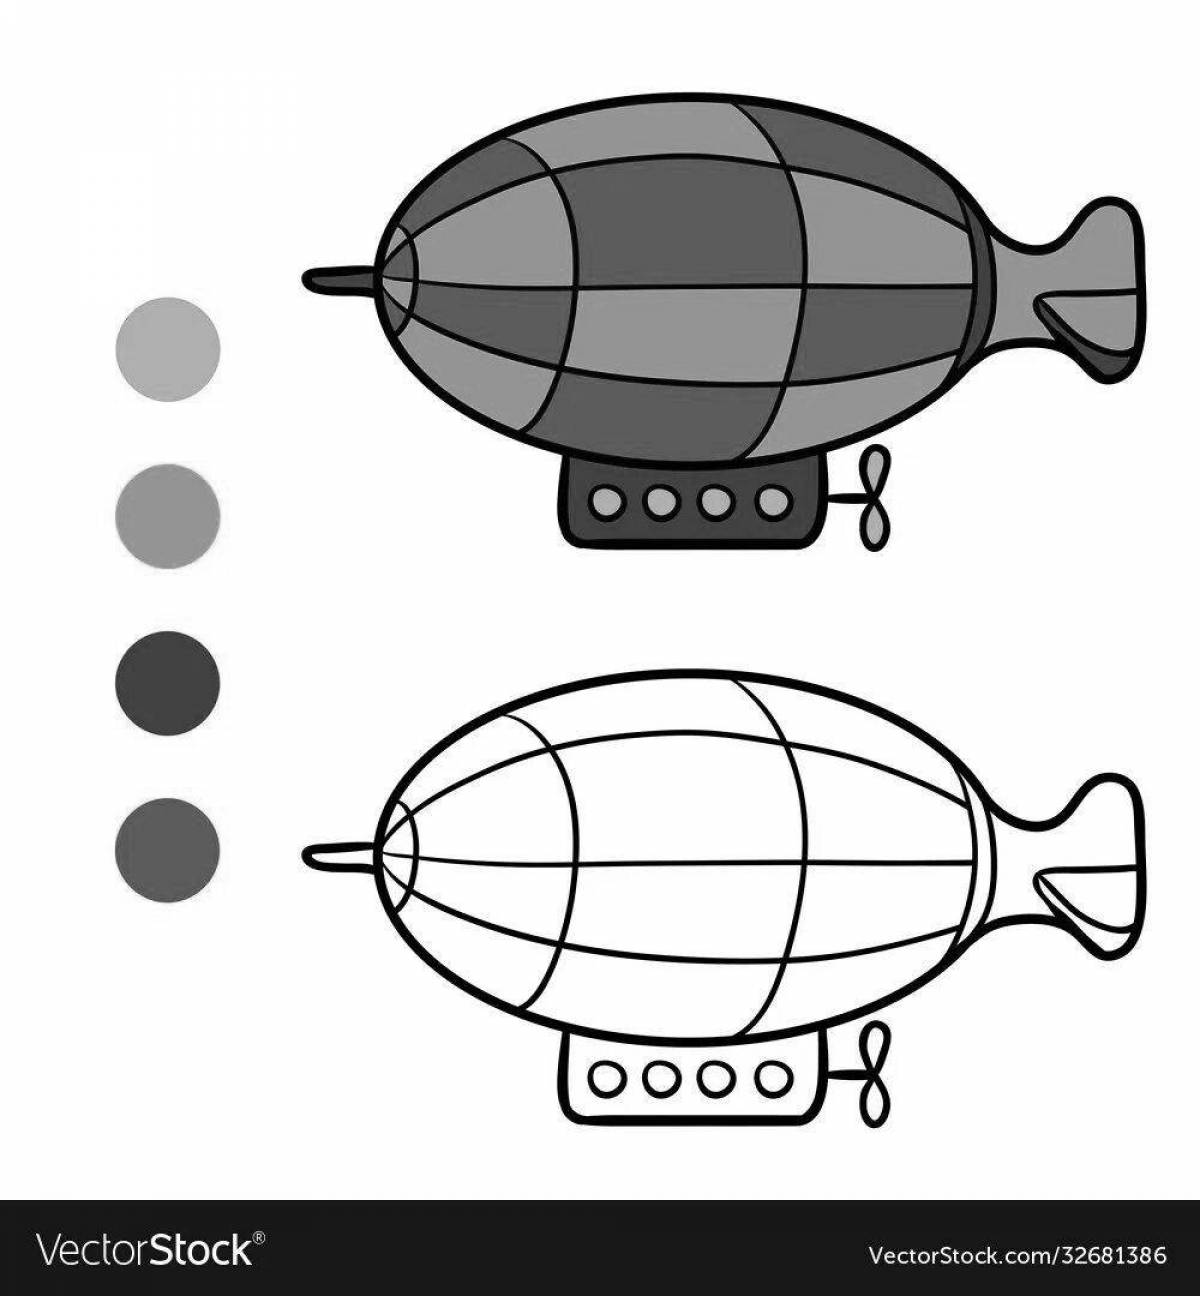 A fun airship coloring book for kids